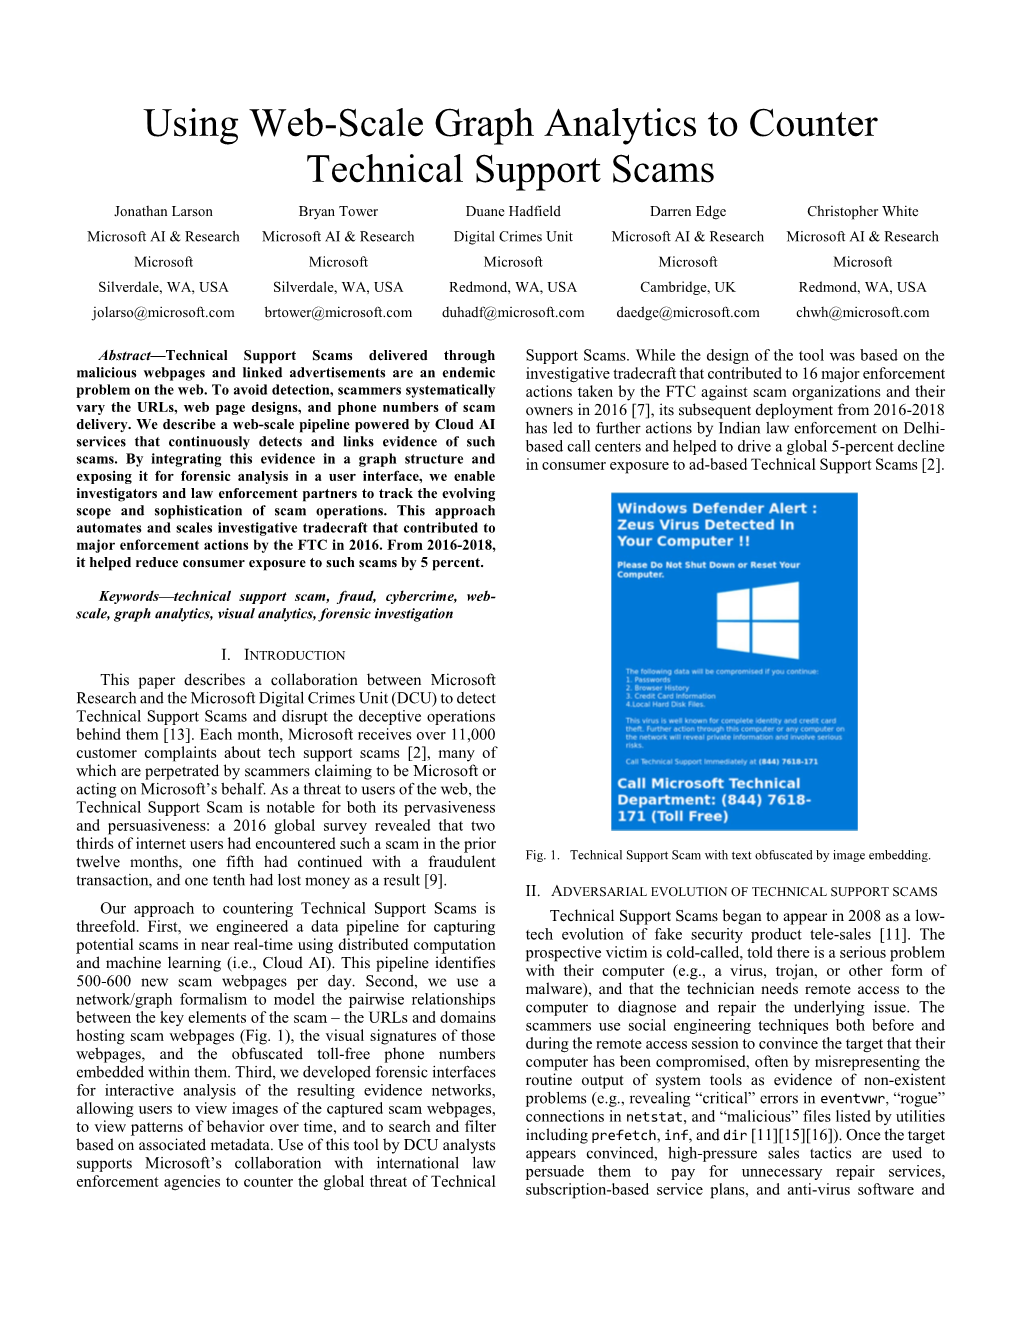 Using Web-Scale Graph Analytics to Counter Technical Support Scams